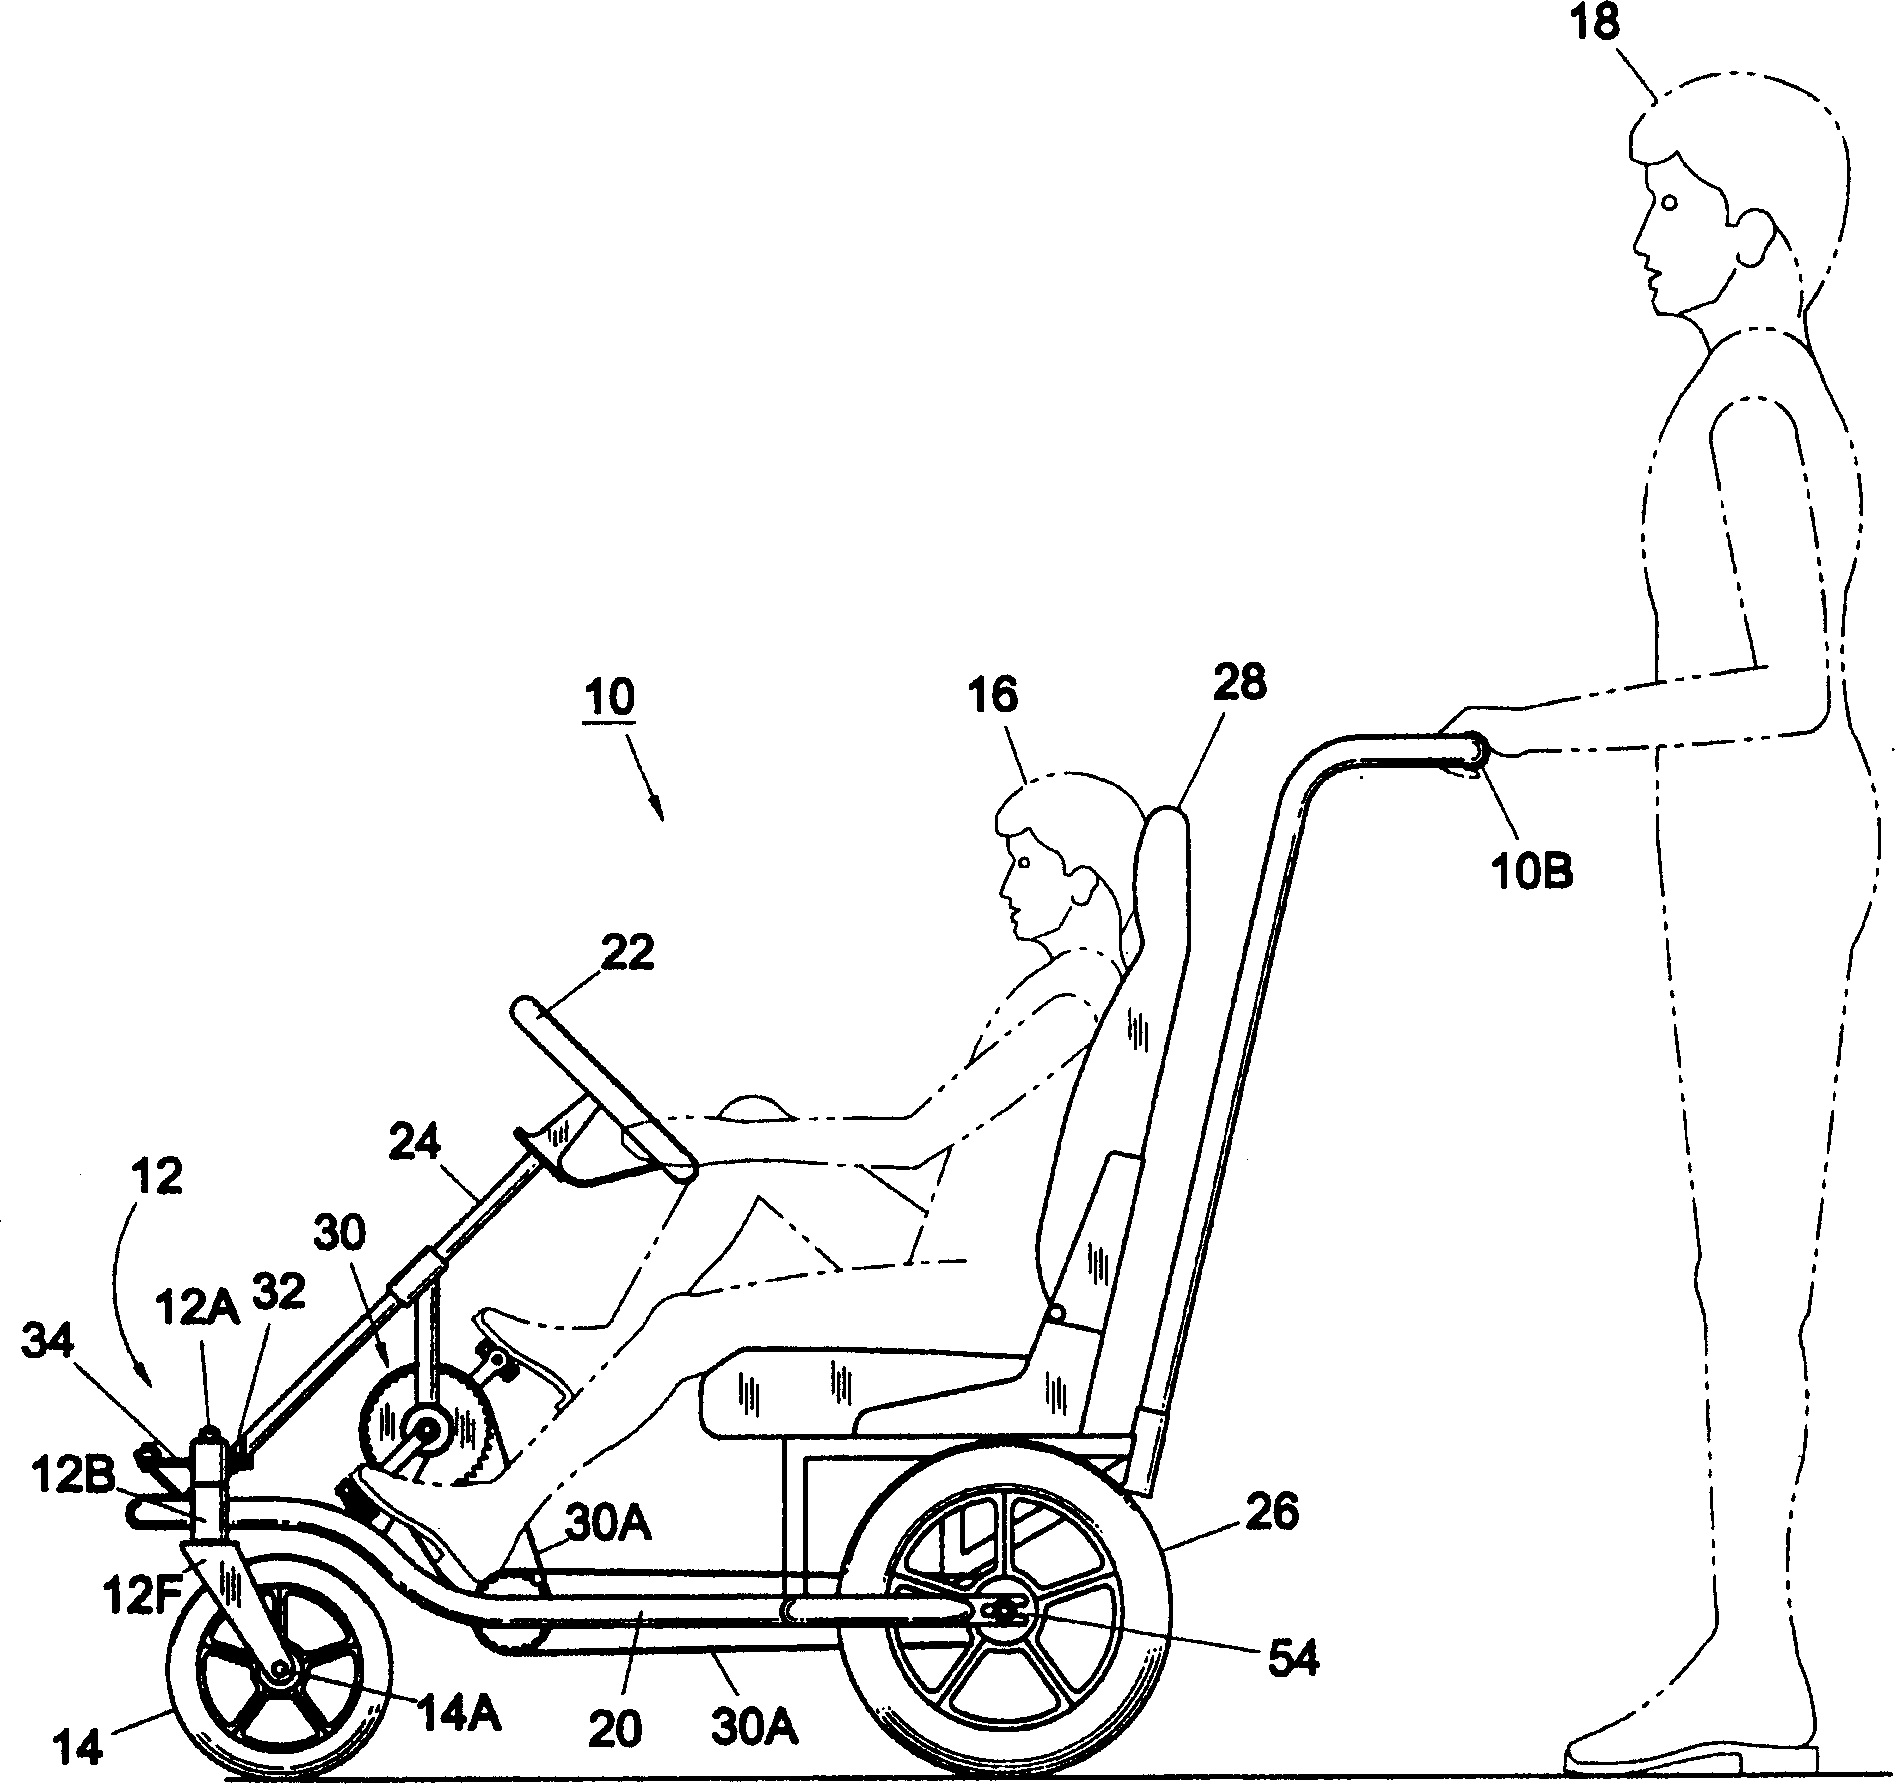 Vehicle with swivel control of casters for enabling rider or external steering